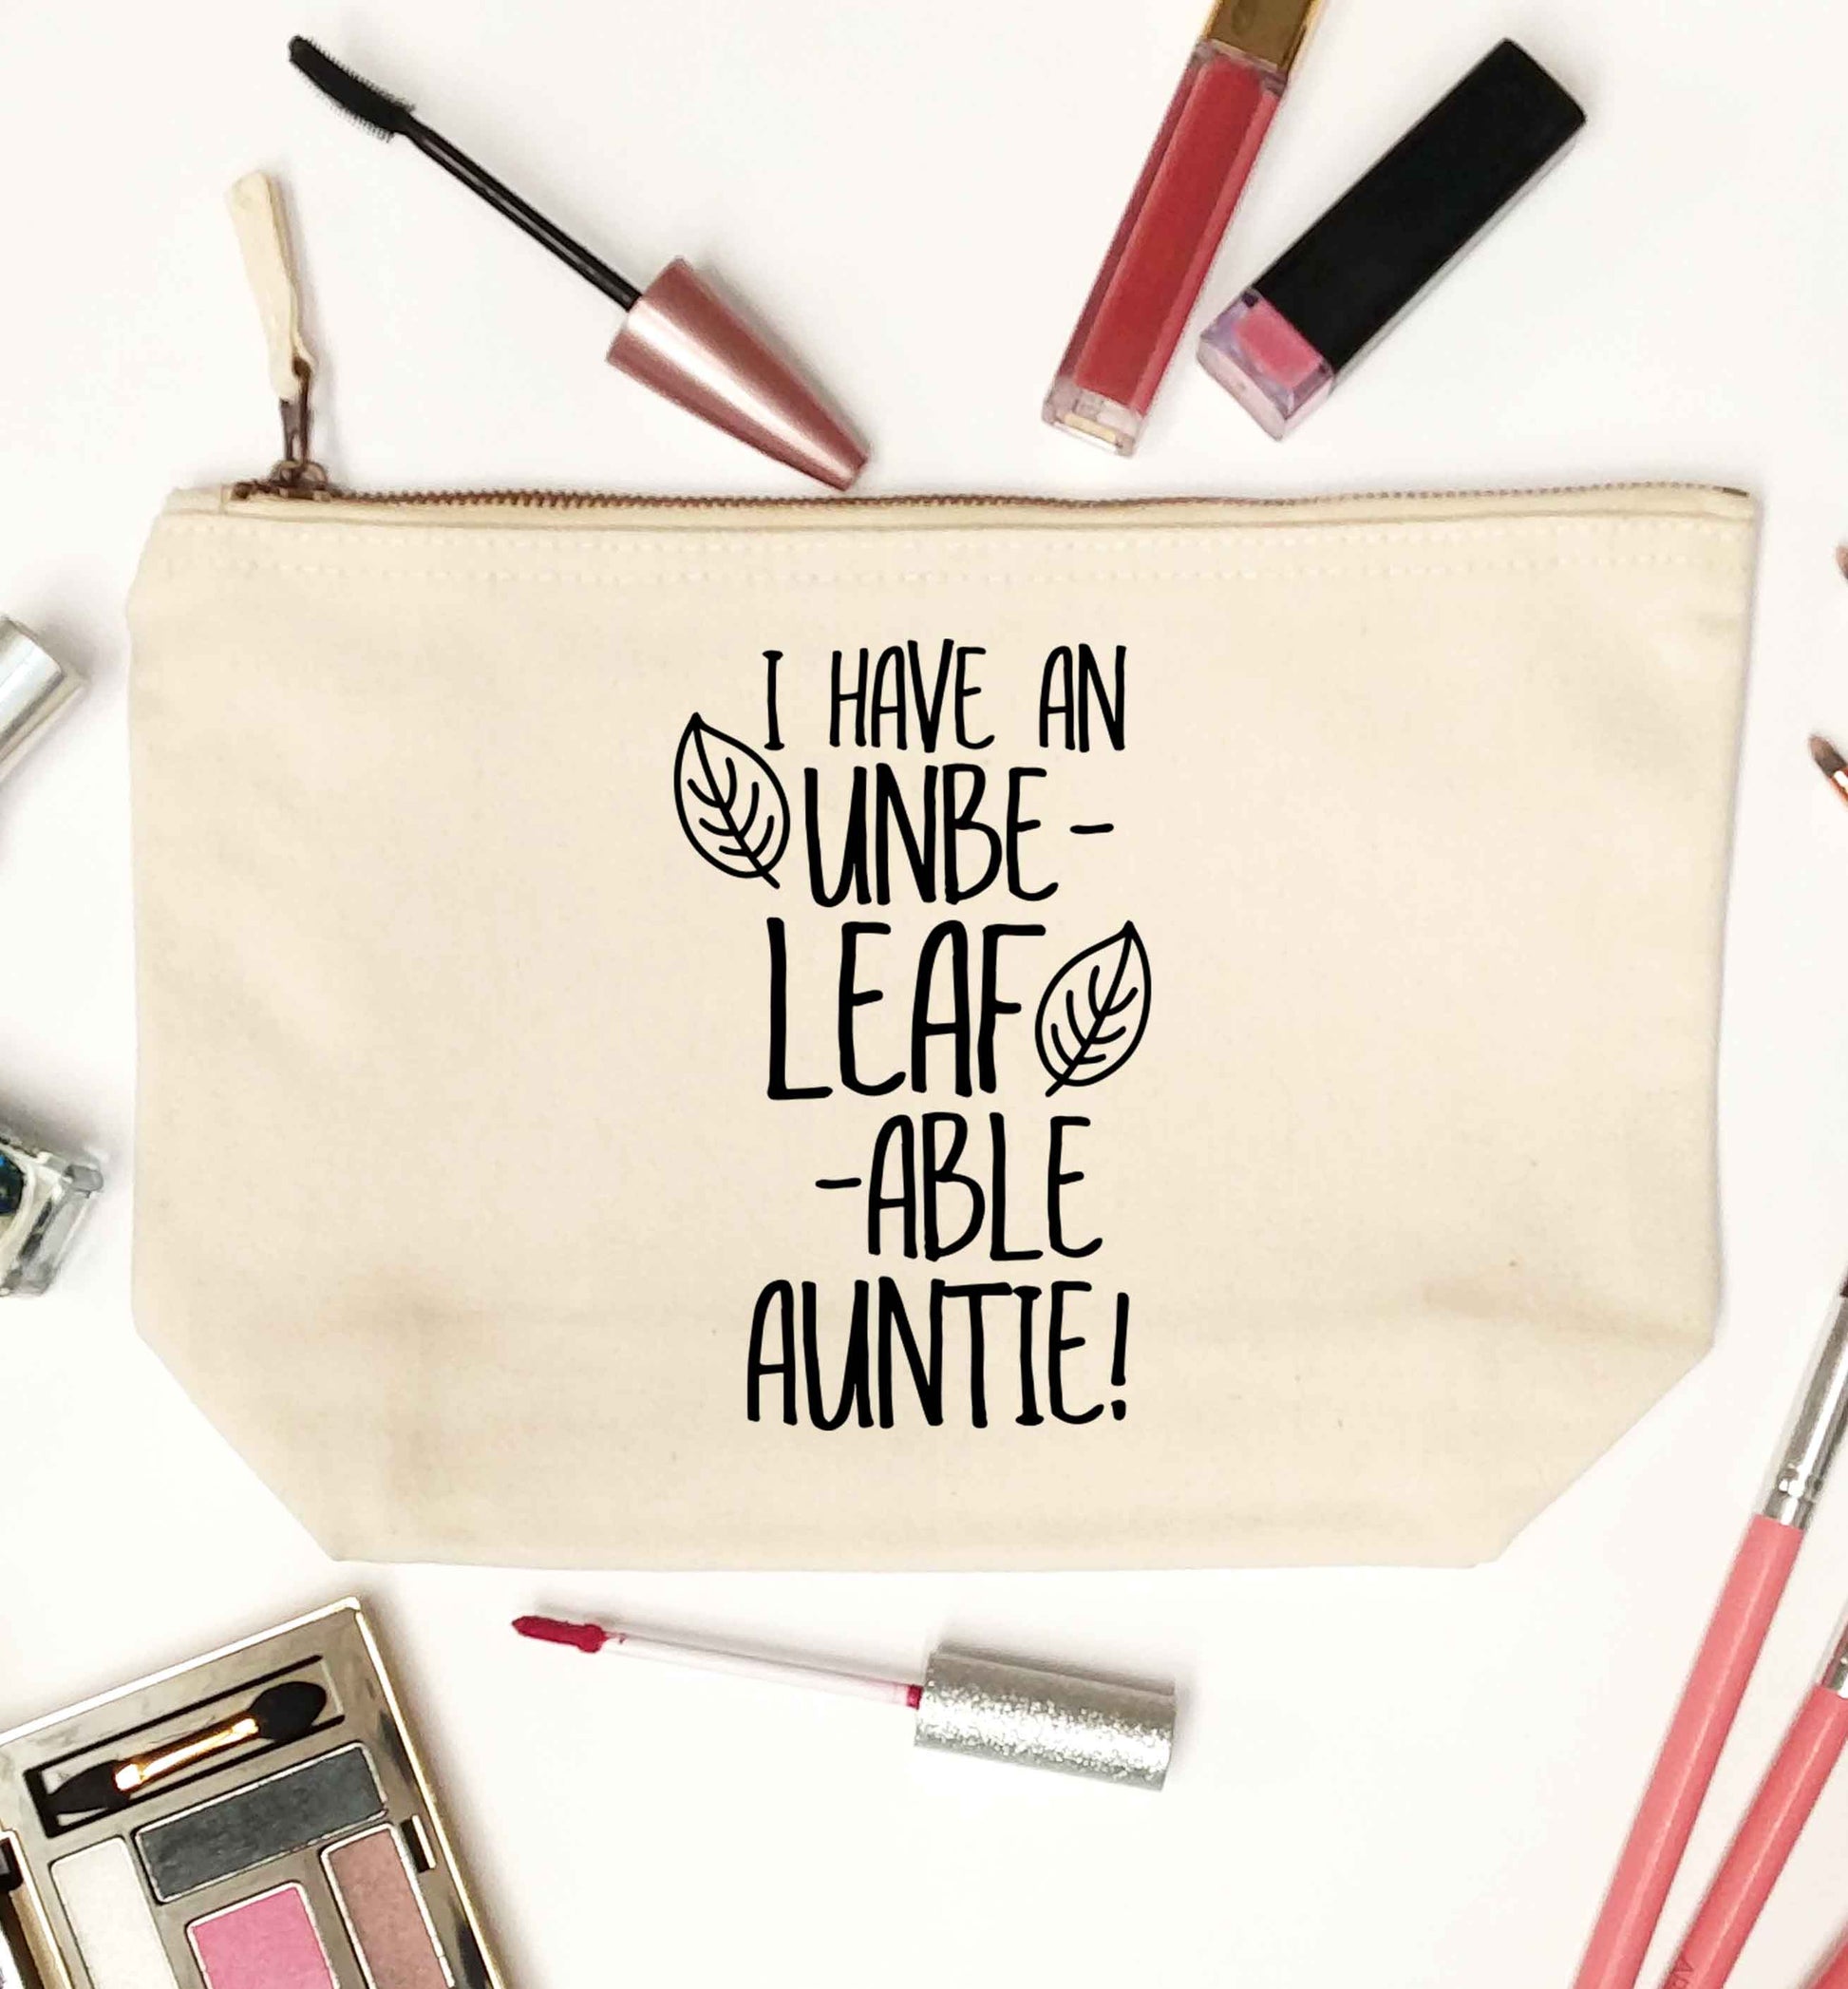 I have an unbe-leaf-able auntie natural makeup bag